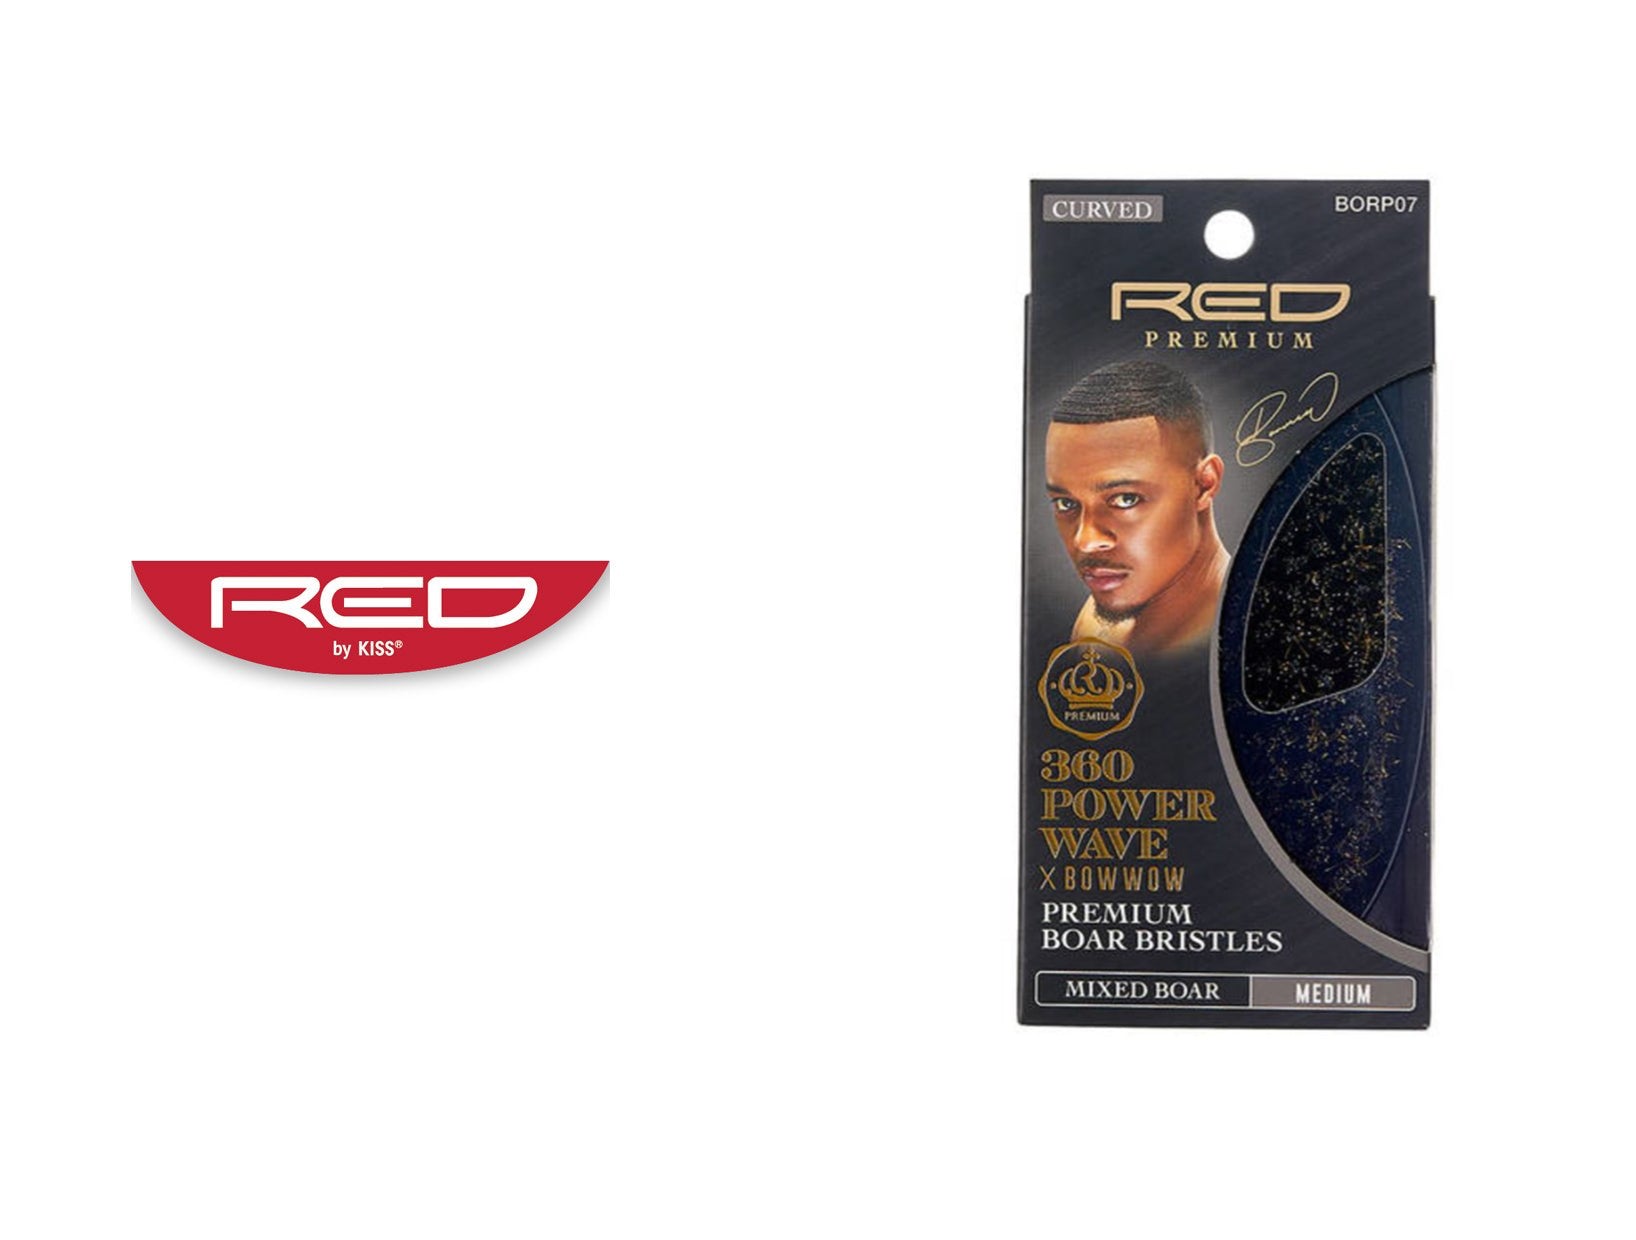 RED BY KISS RPM POWER WAVE PALM BOAR BRUSH (MEDIUM)